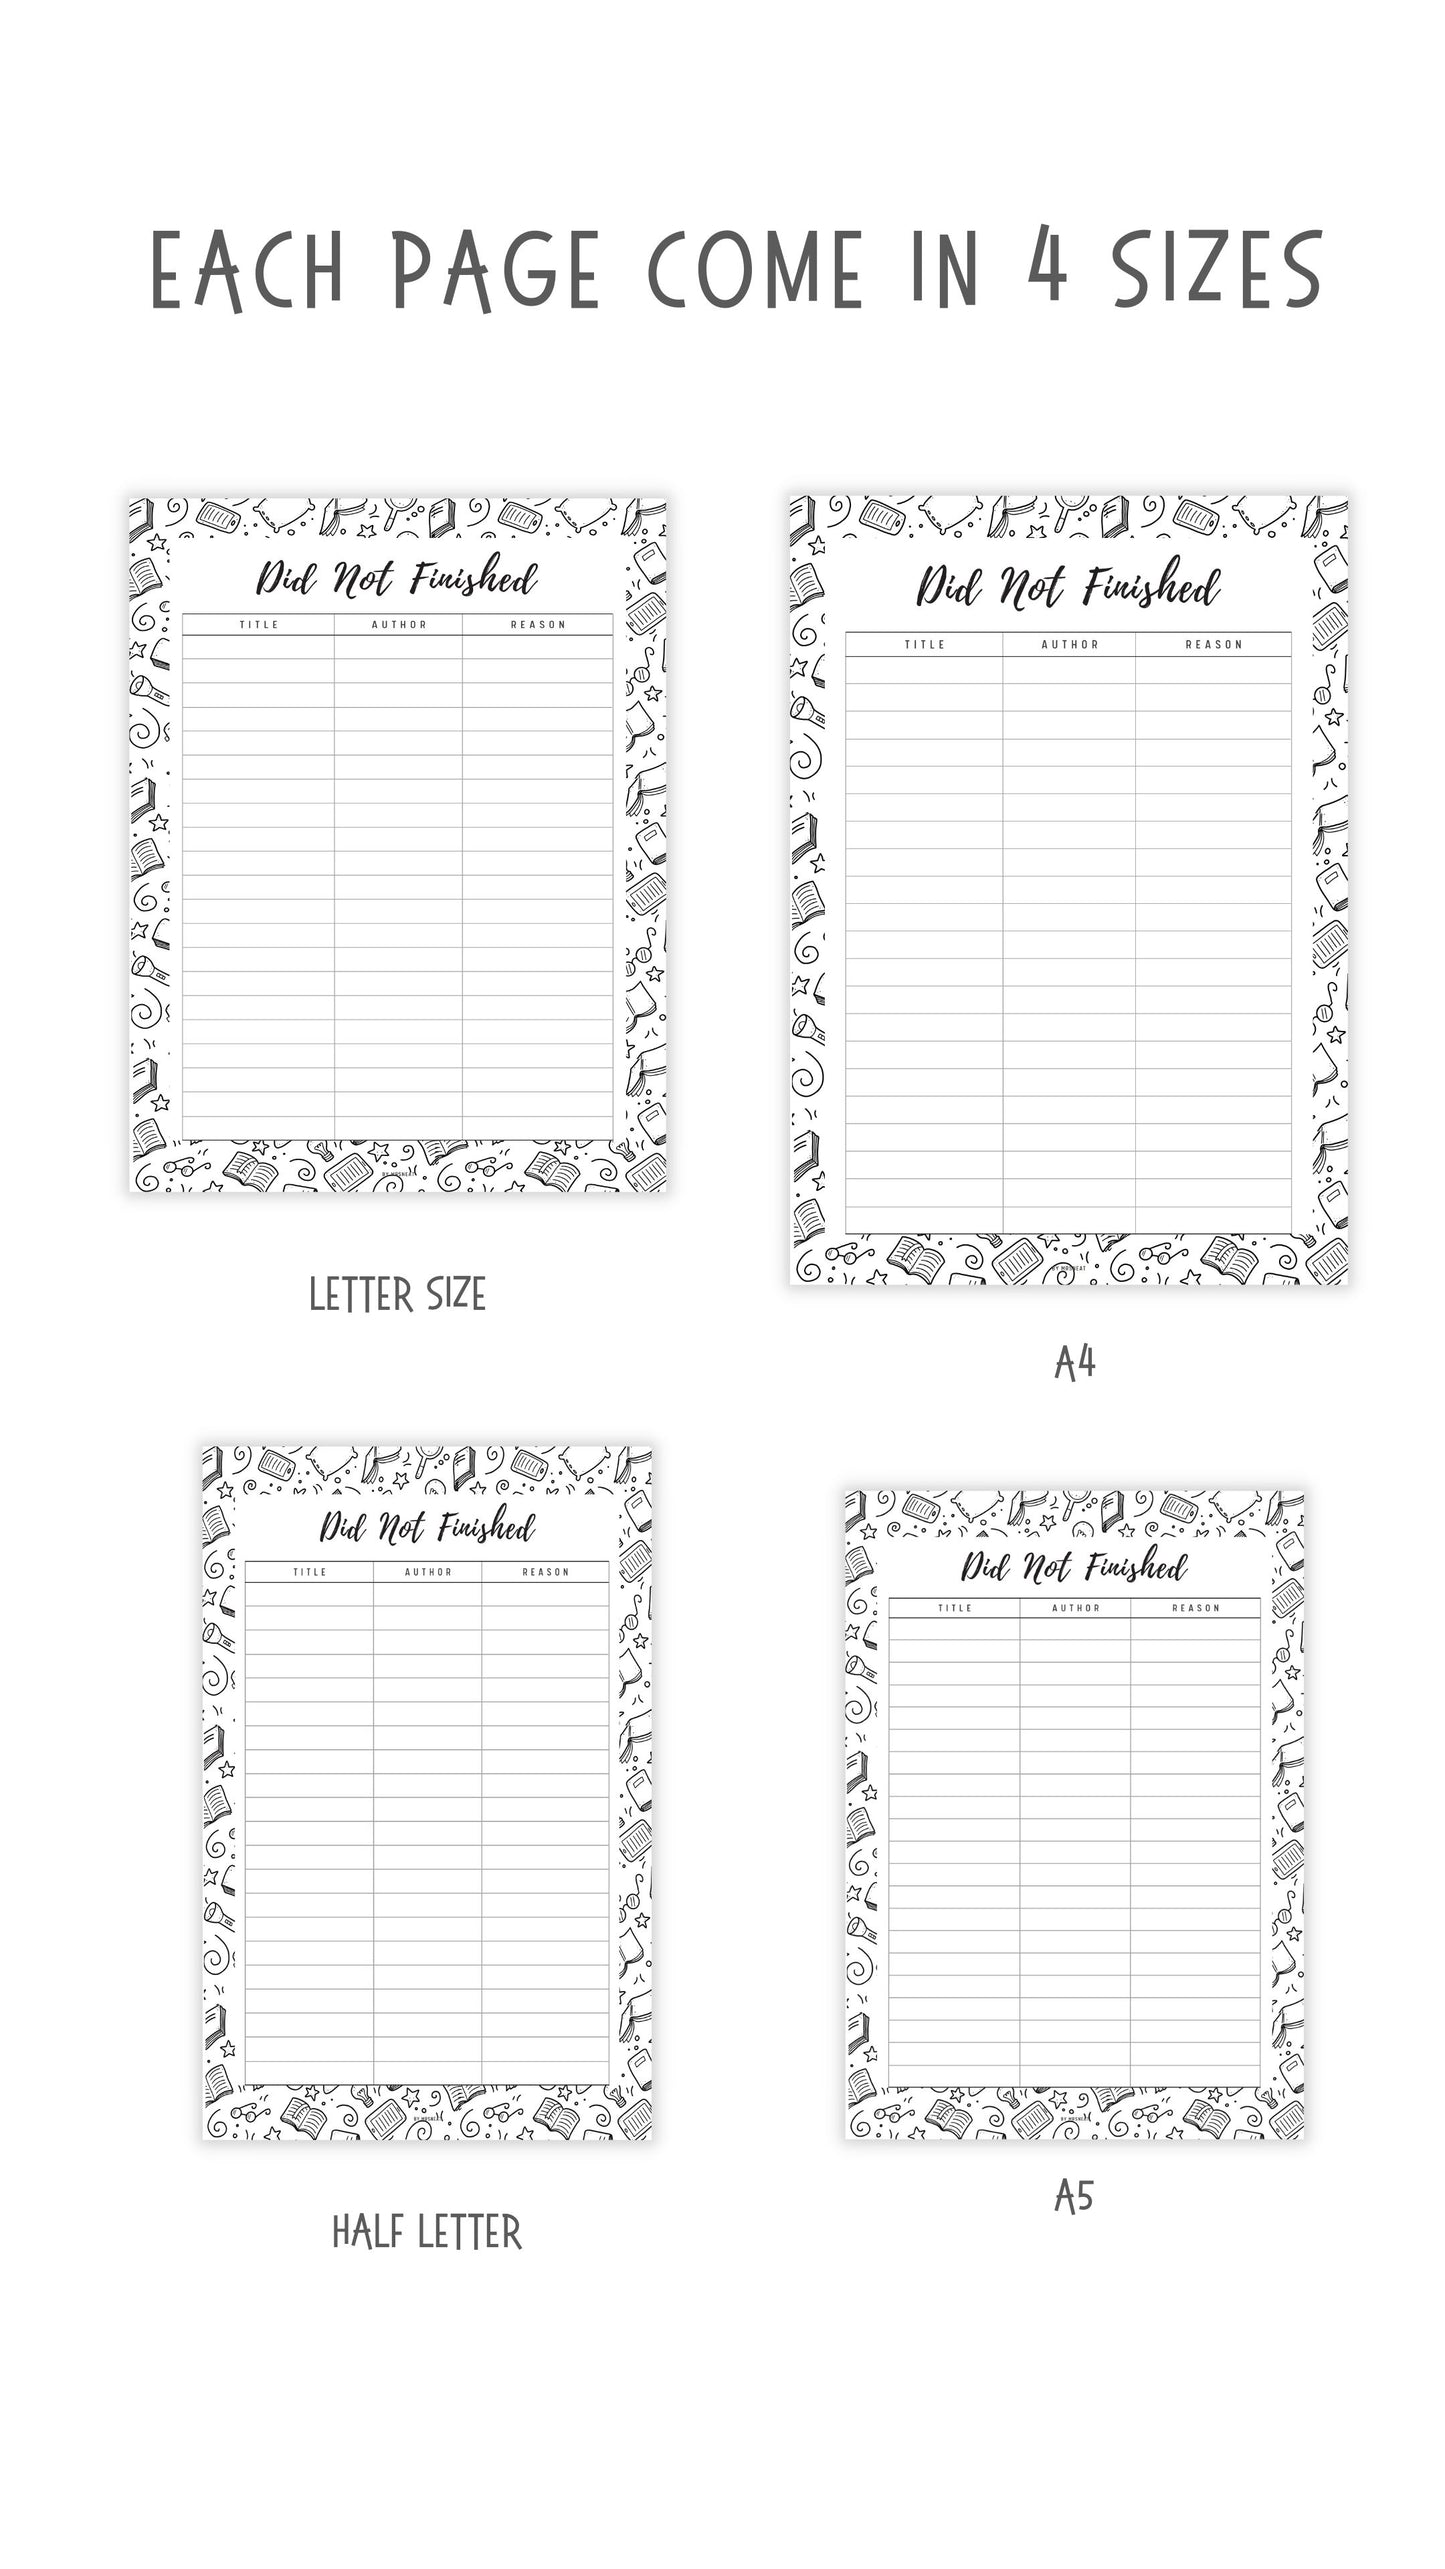 Books I Did Not Finished Template Printable, 5 colors : Blue, Neutral, Green, Pink, Peach, 4 sizes : A4, A5, Letter, Half Letter, Digital Planner